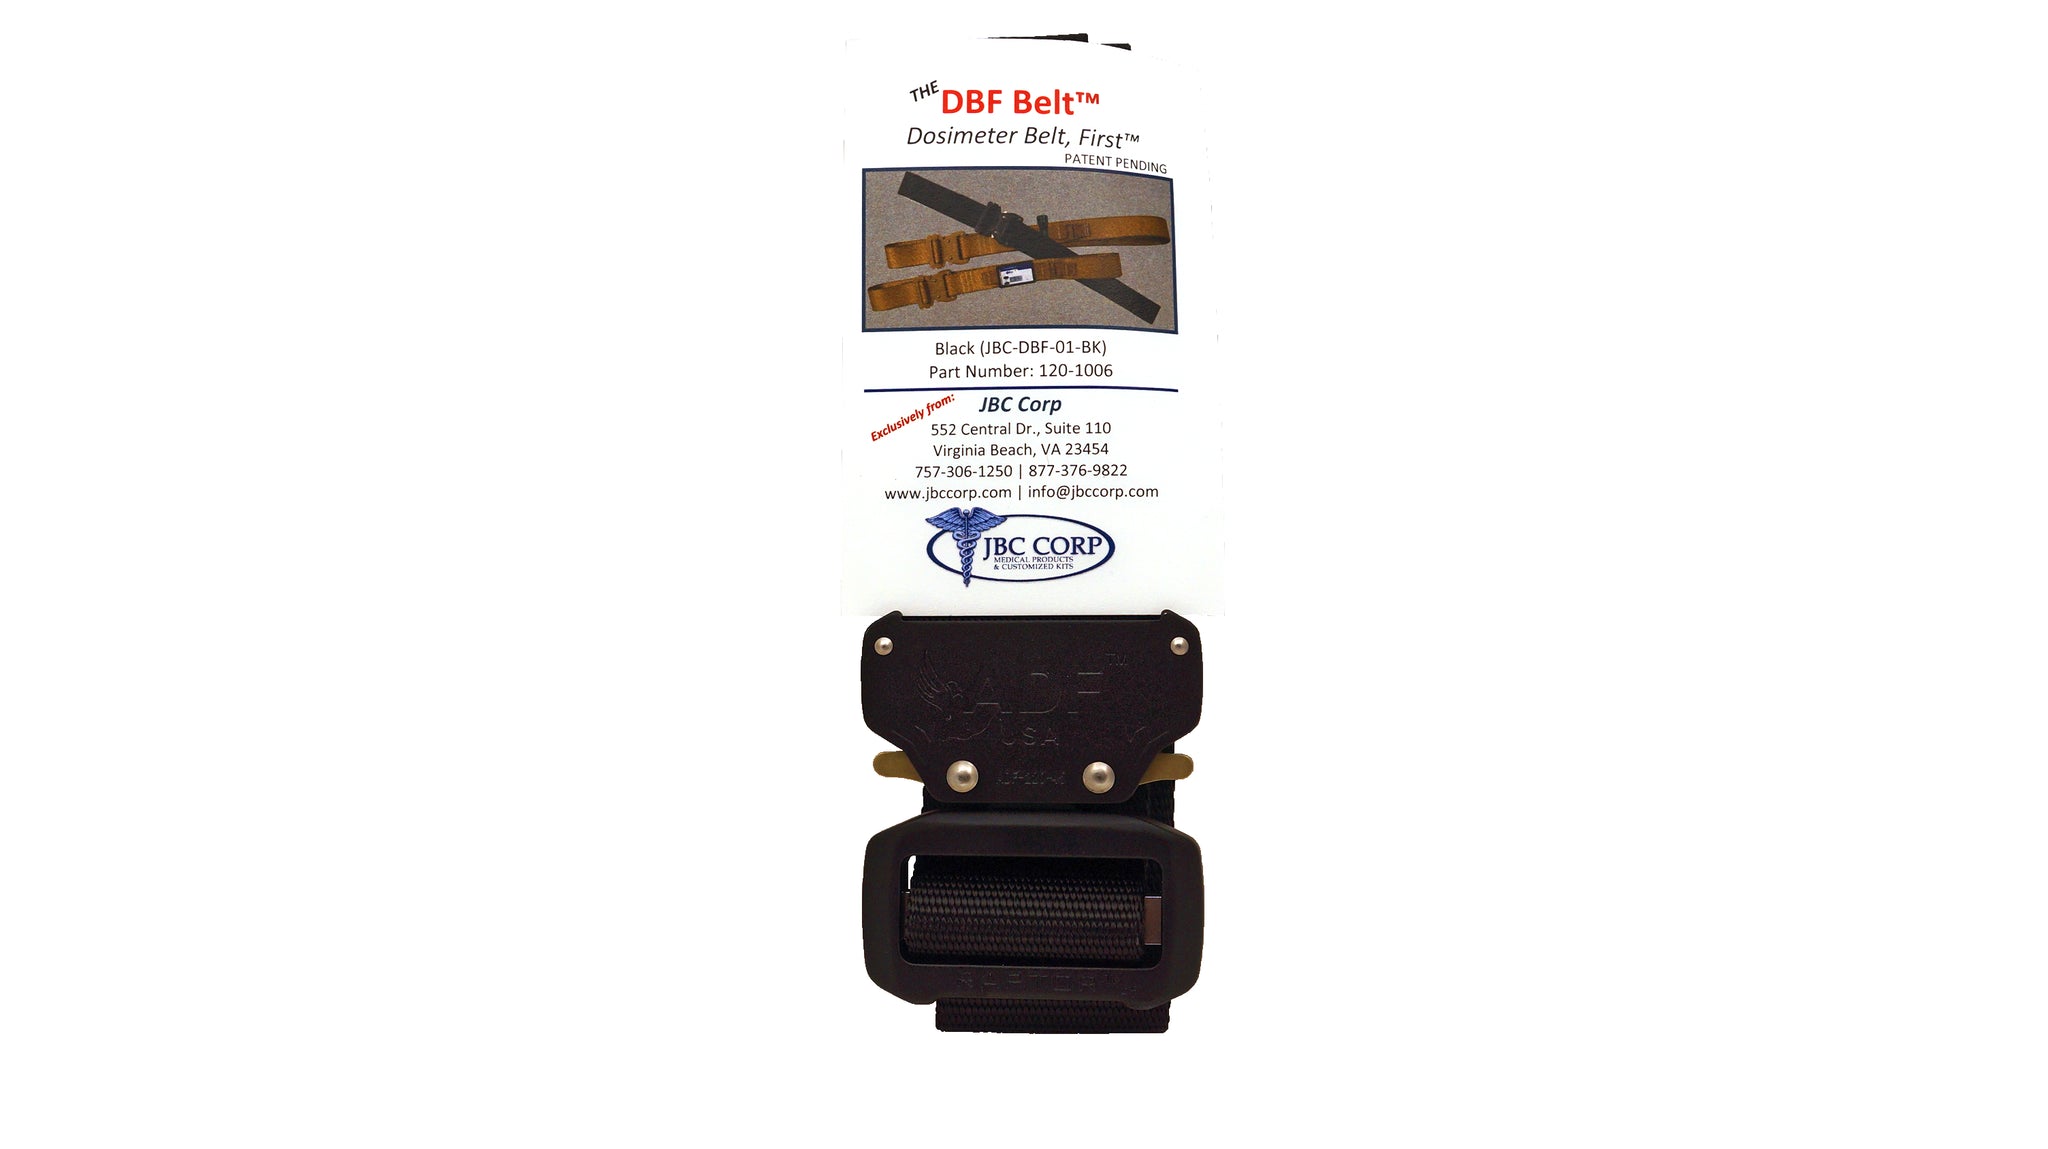 Black rigger’s style belt with added nylon loop and metal hook to secure a ThermoLuminescent Dosimeter or TLD.